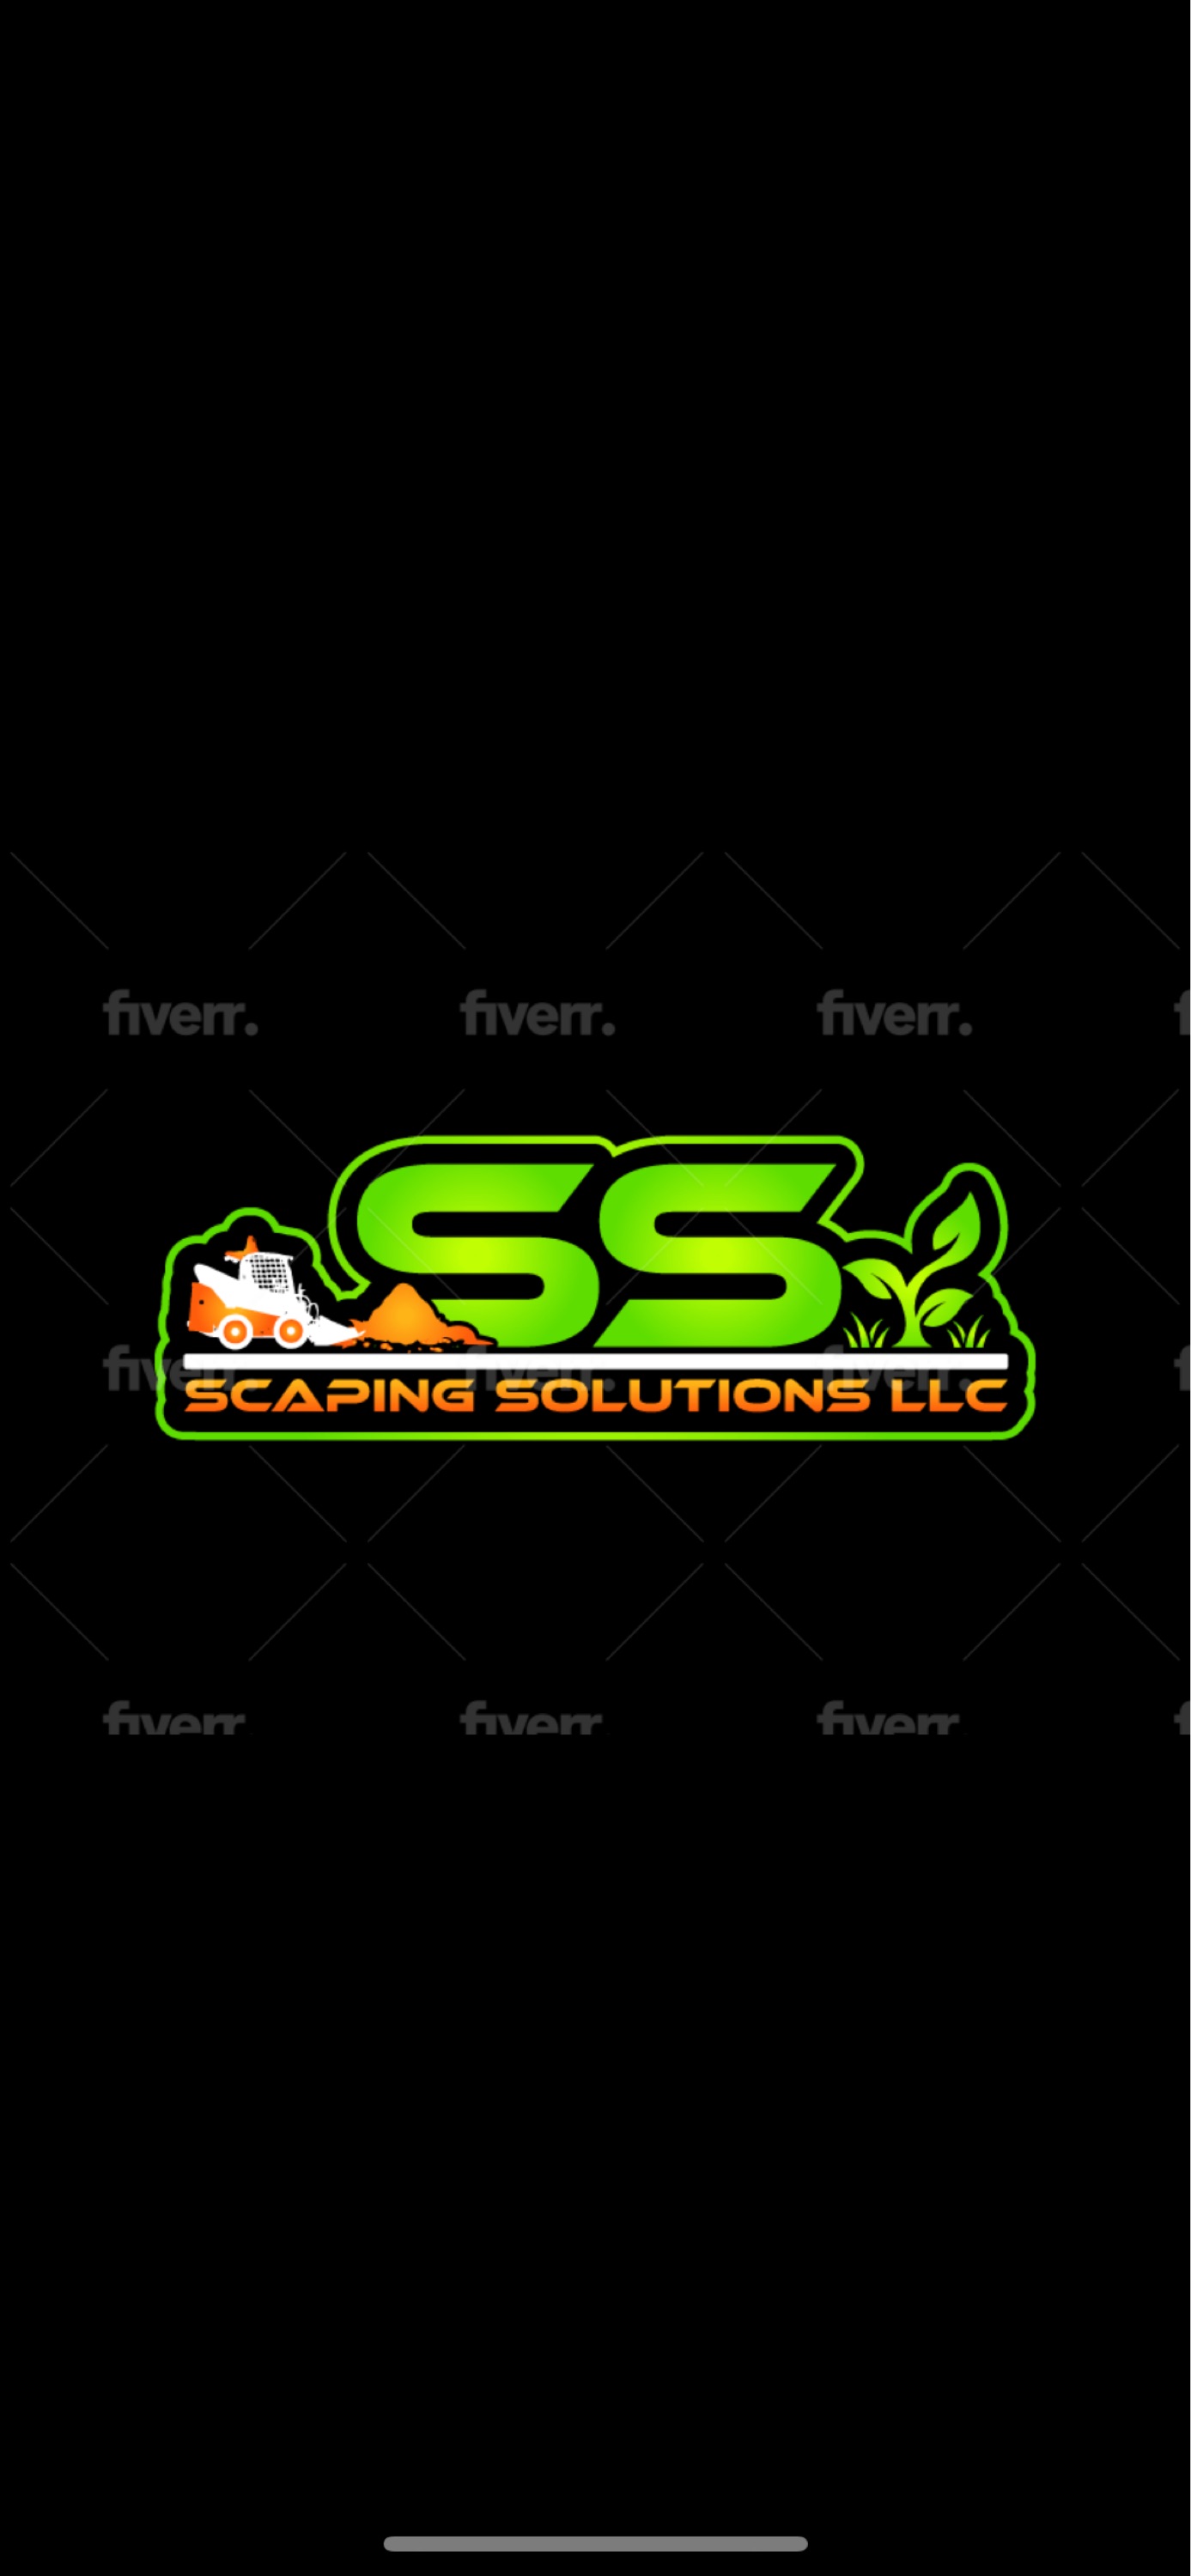 Scaping Solutions, LLC Logo